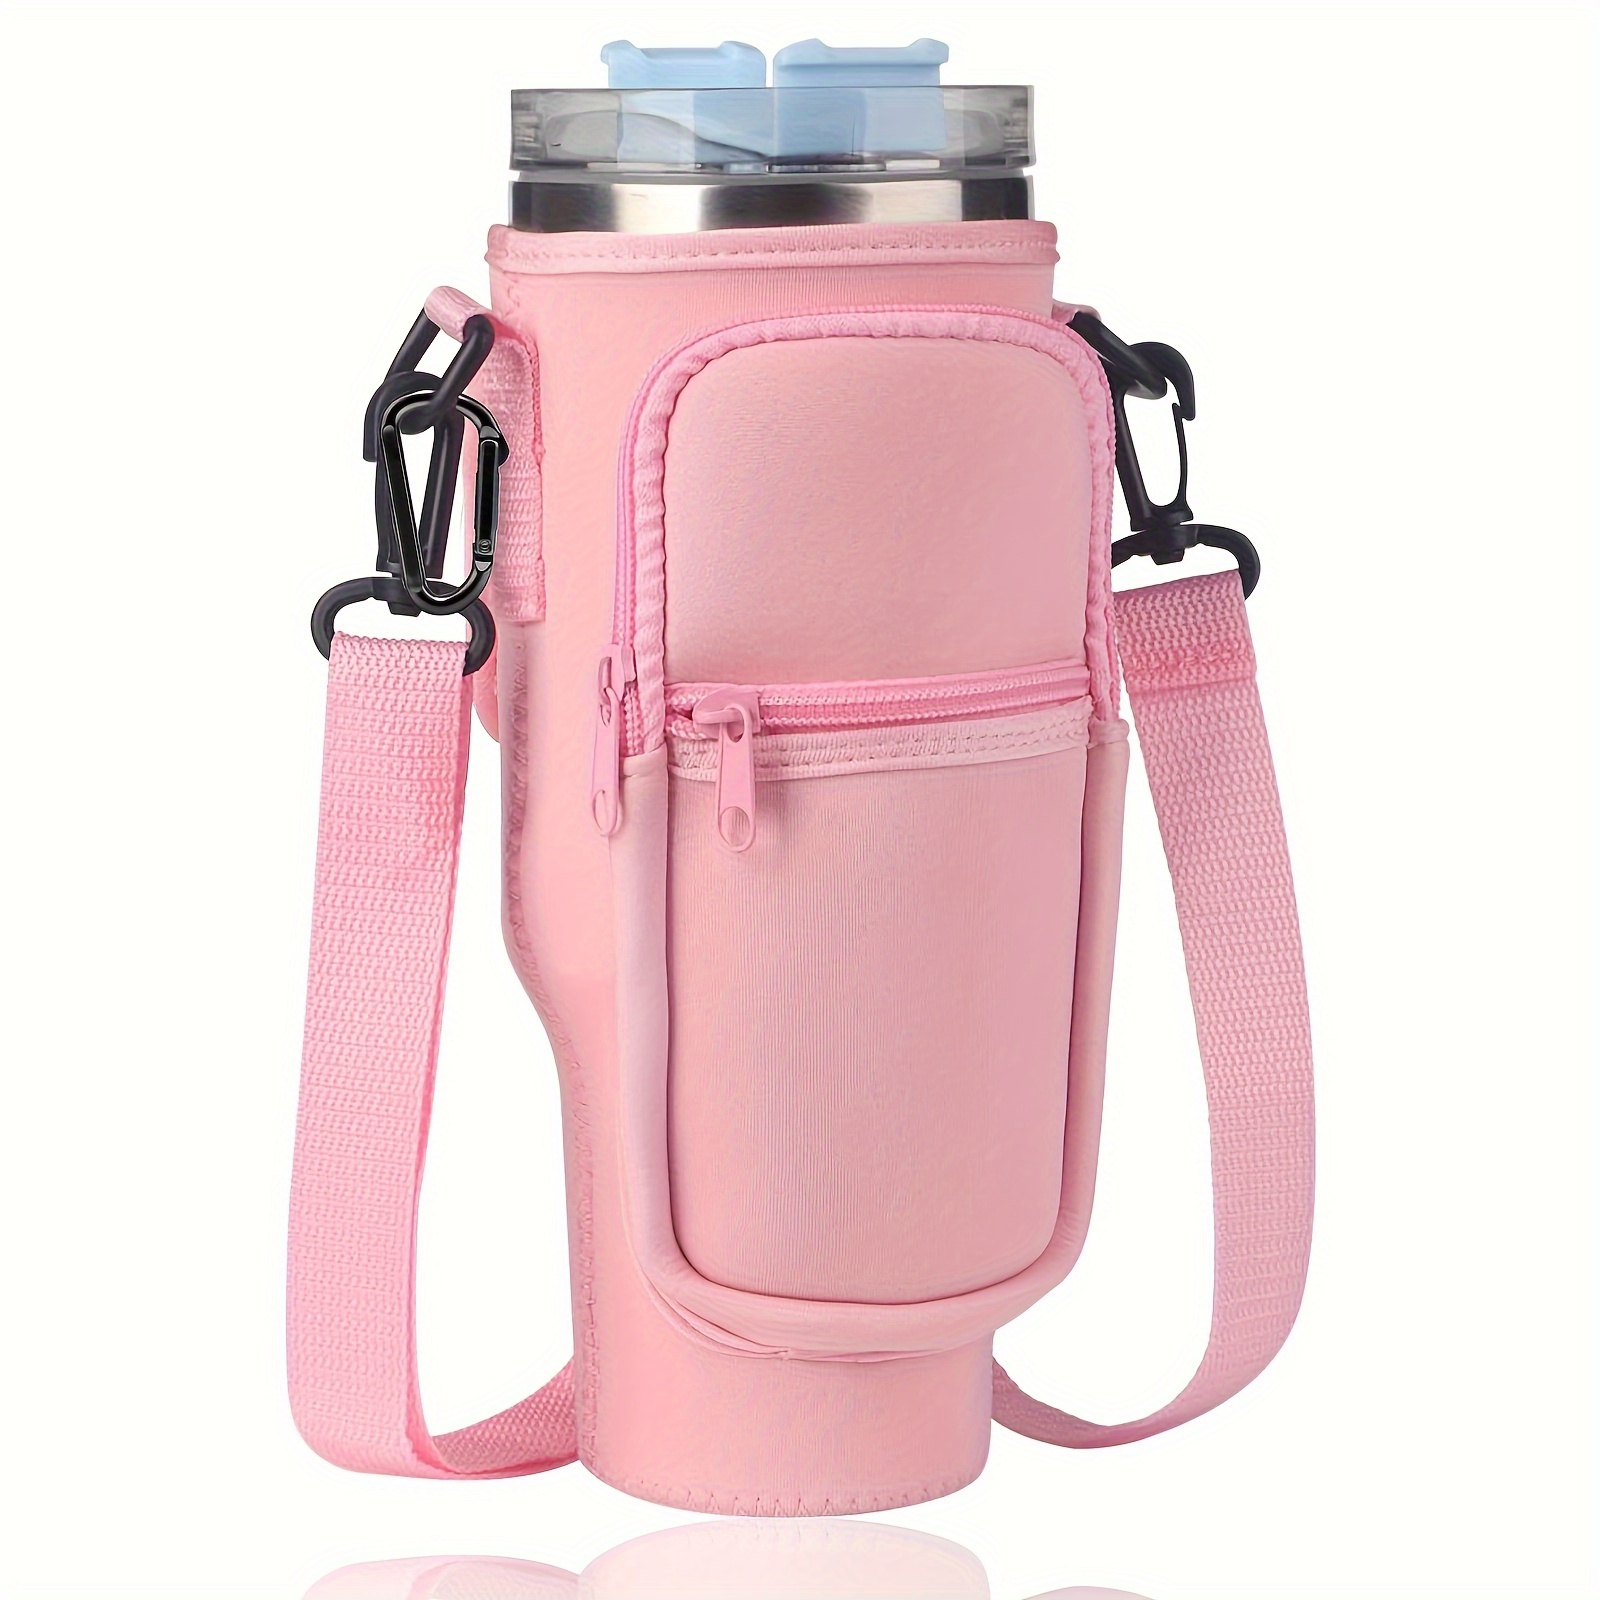 Water Bottle Carrier Bag With Phone Pocket For Stanley Tumbler